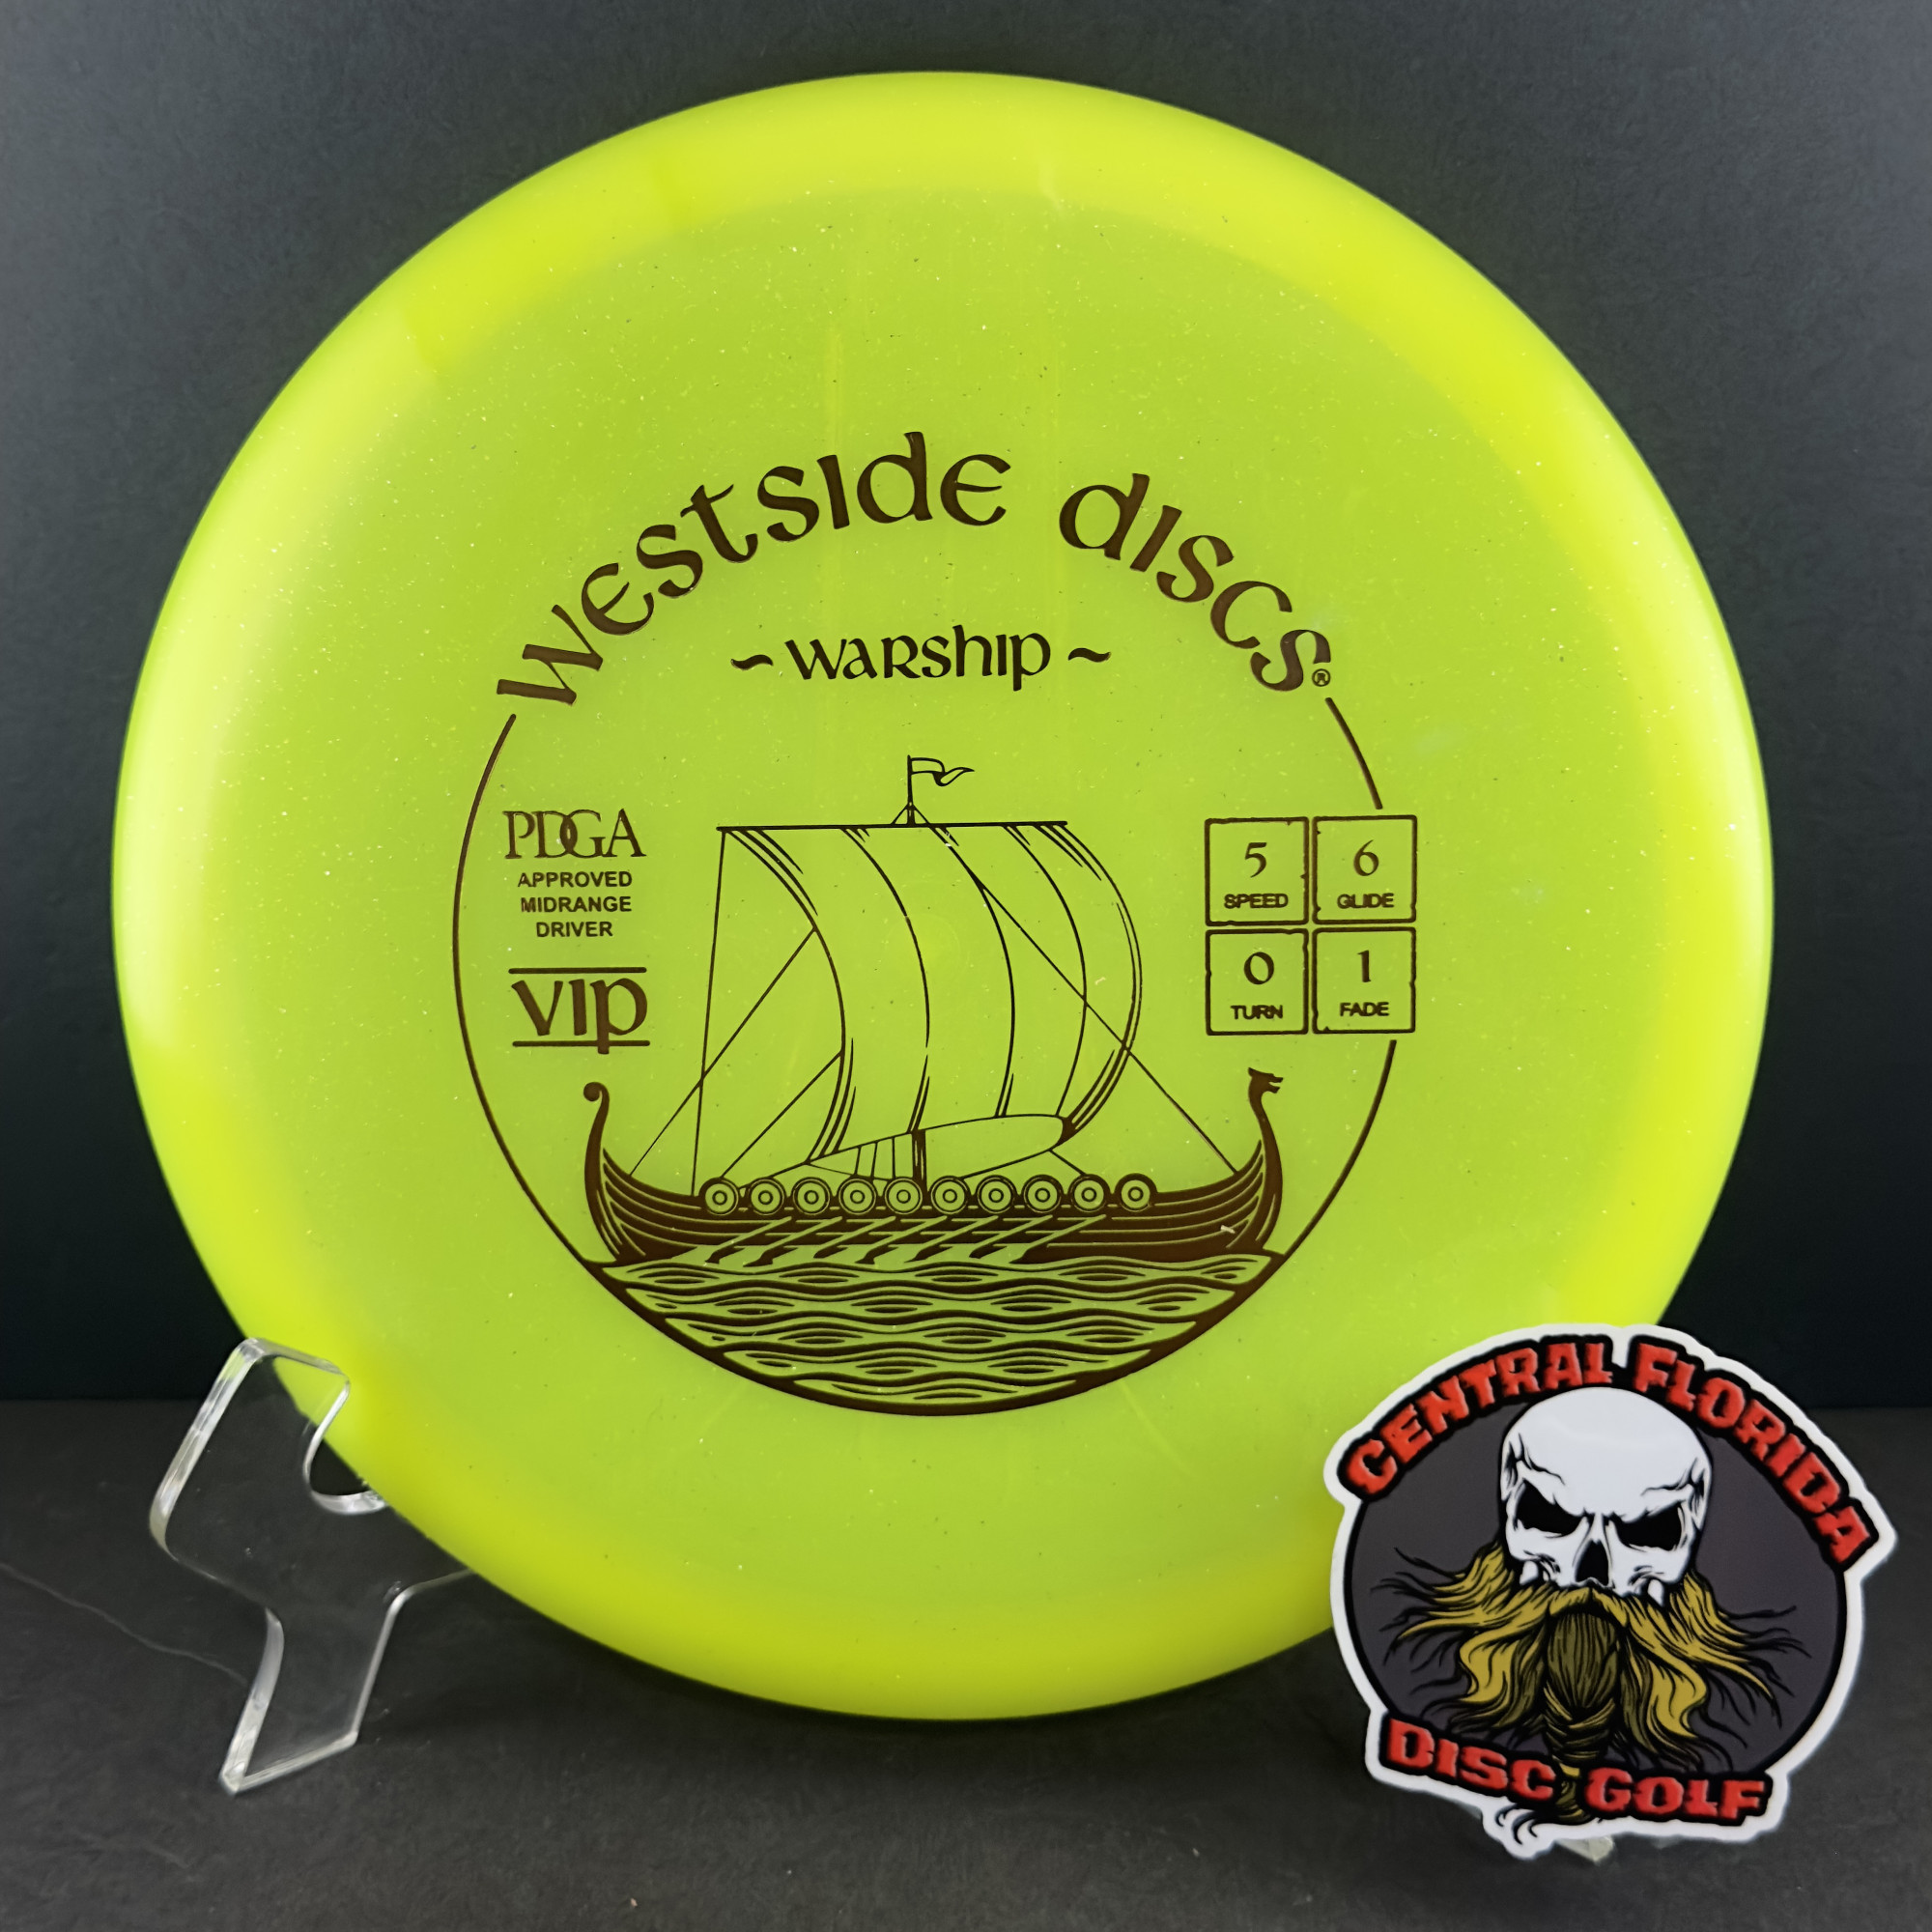 products WESTSIDE DISCS - VIP GLIMMER WARSHIP - 177G -YELLOW/GOLD METALLIC